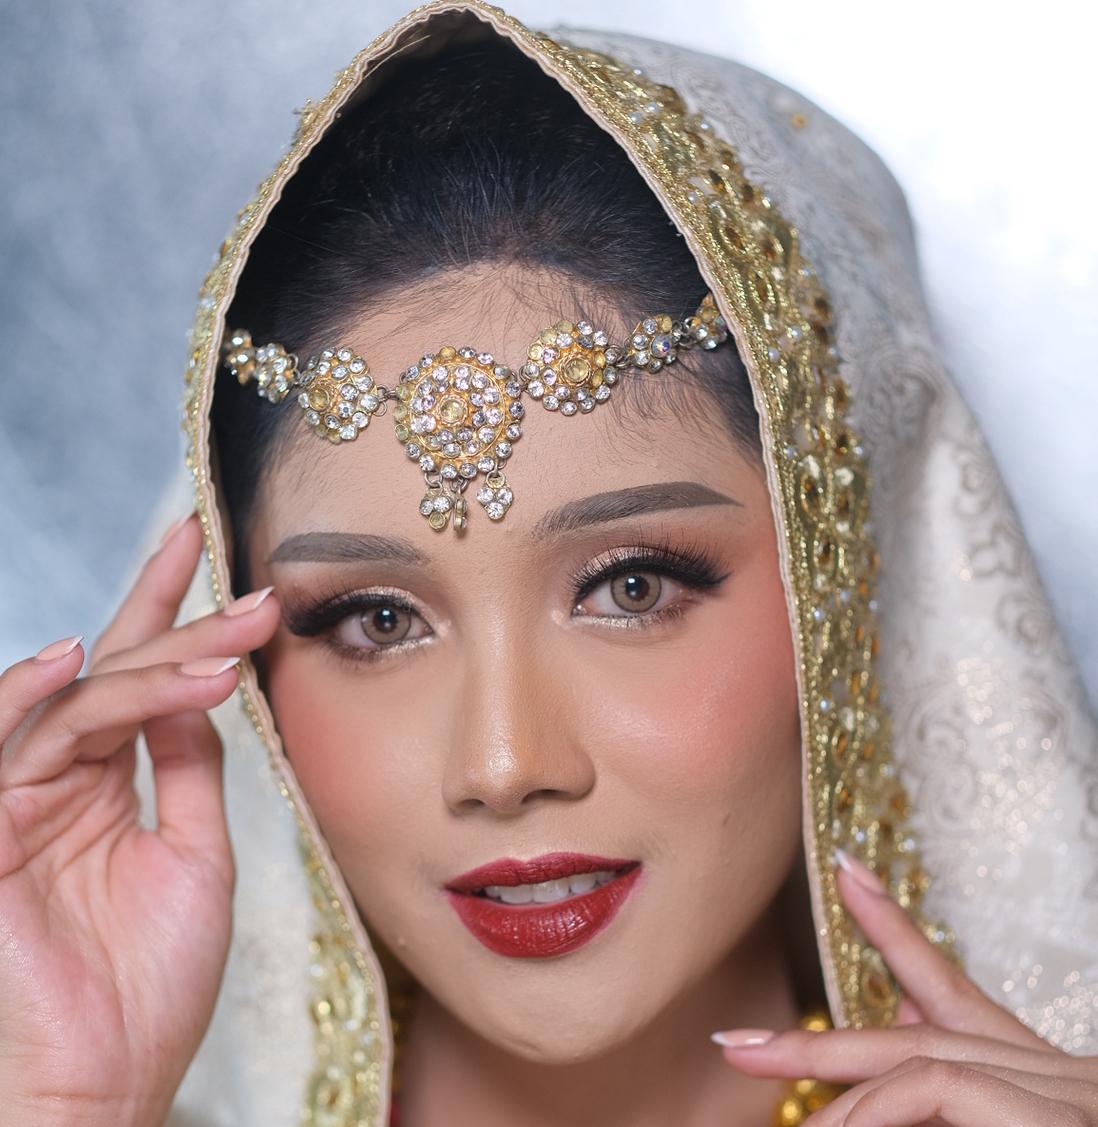 Anissa Makeup's images